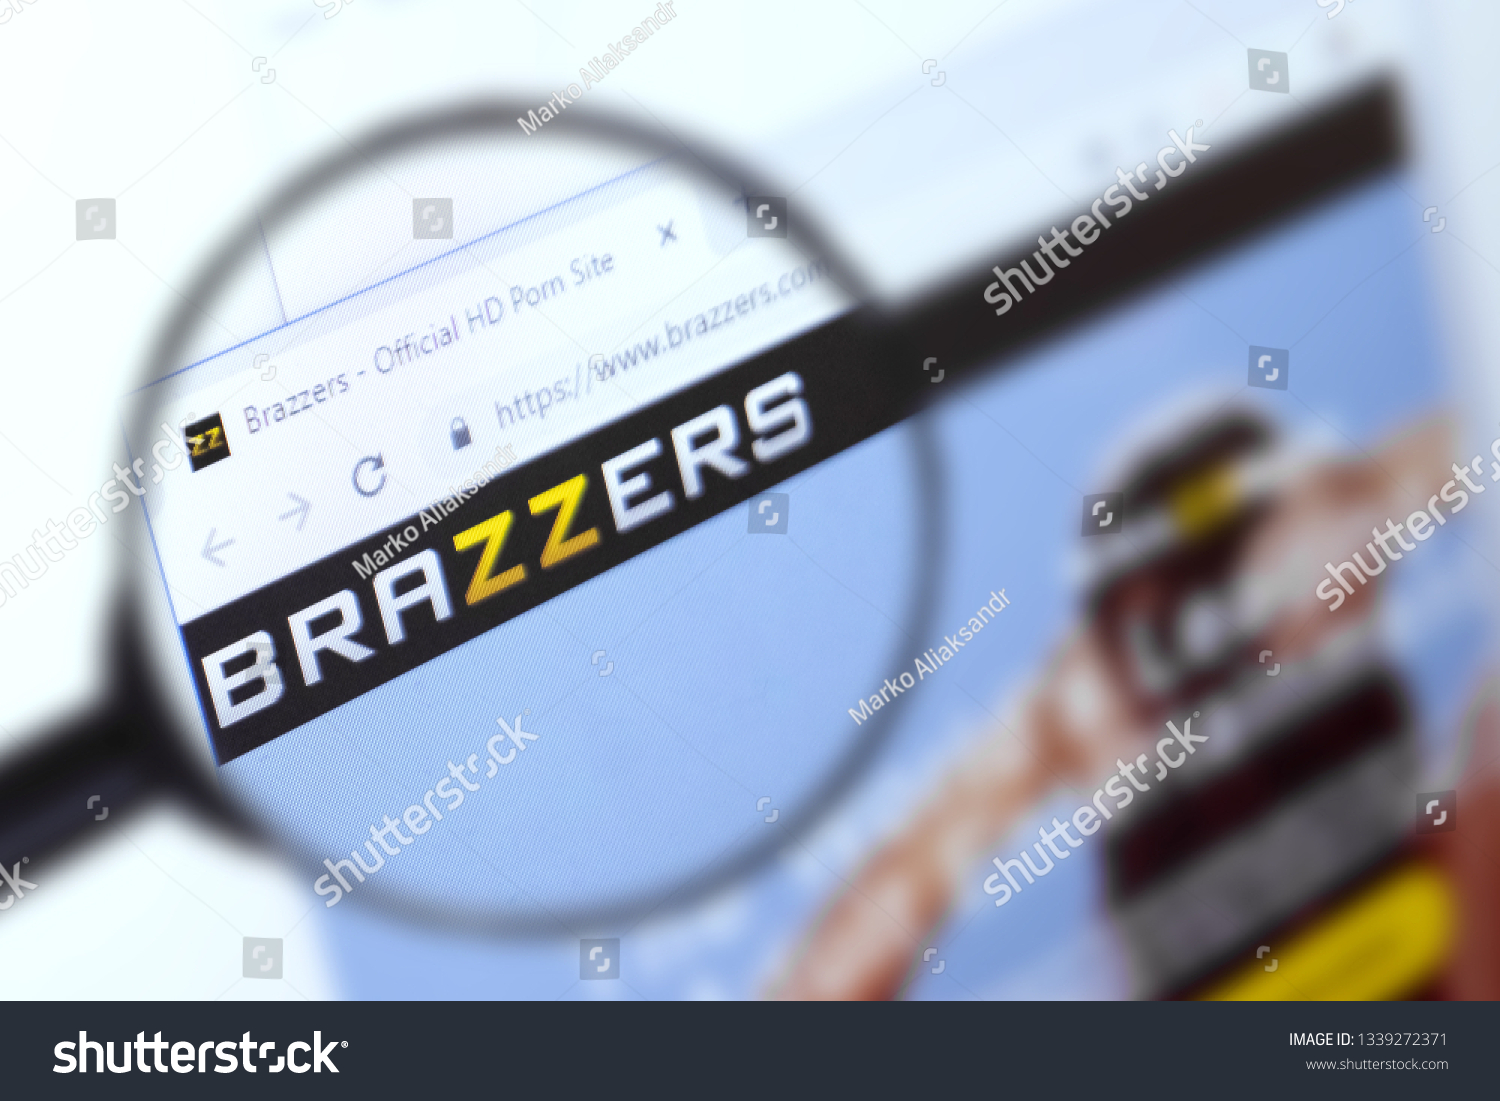 Brazzers Official Site